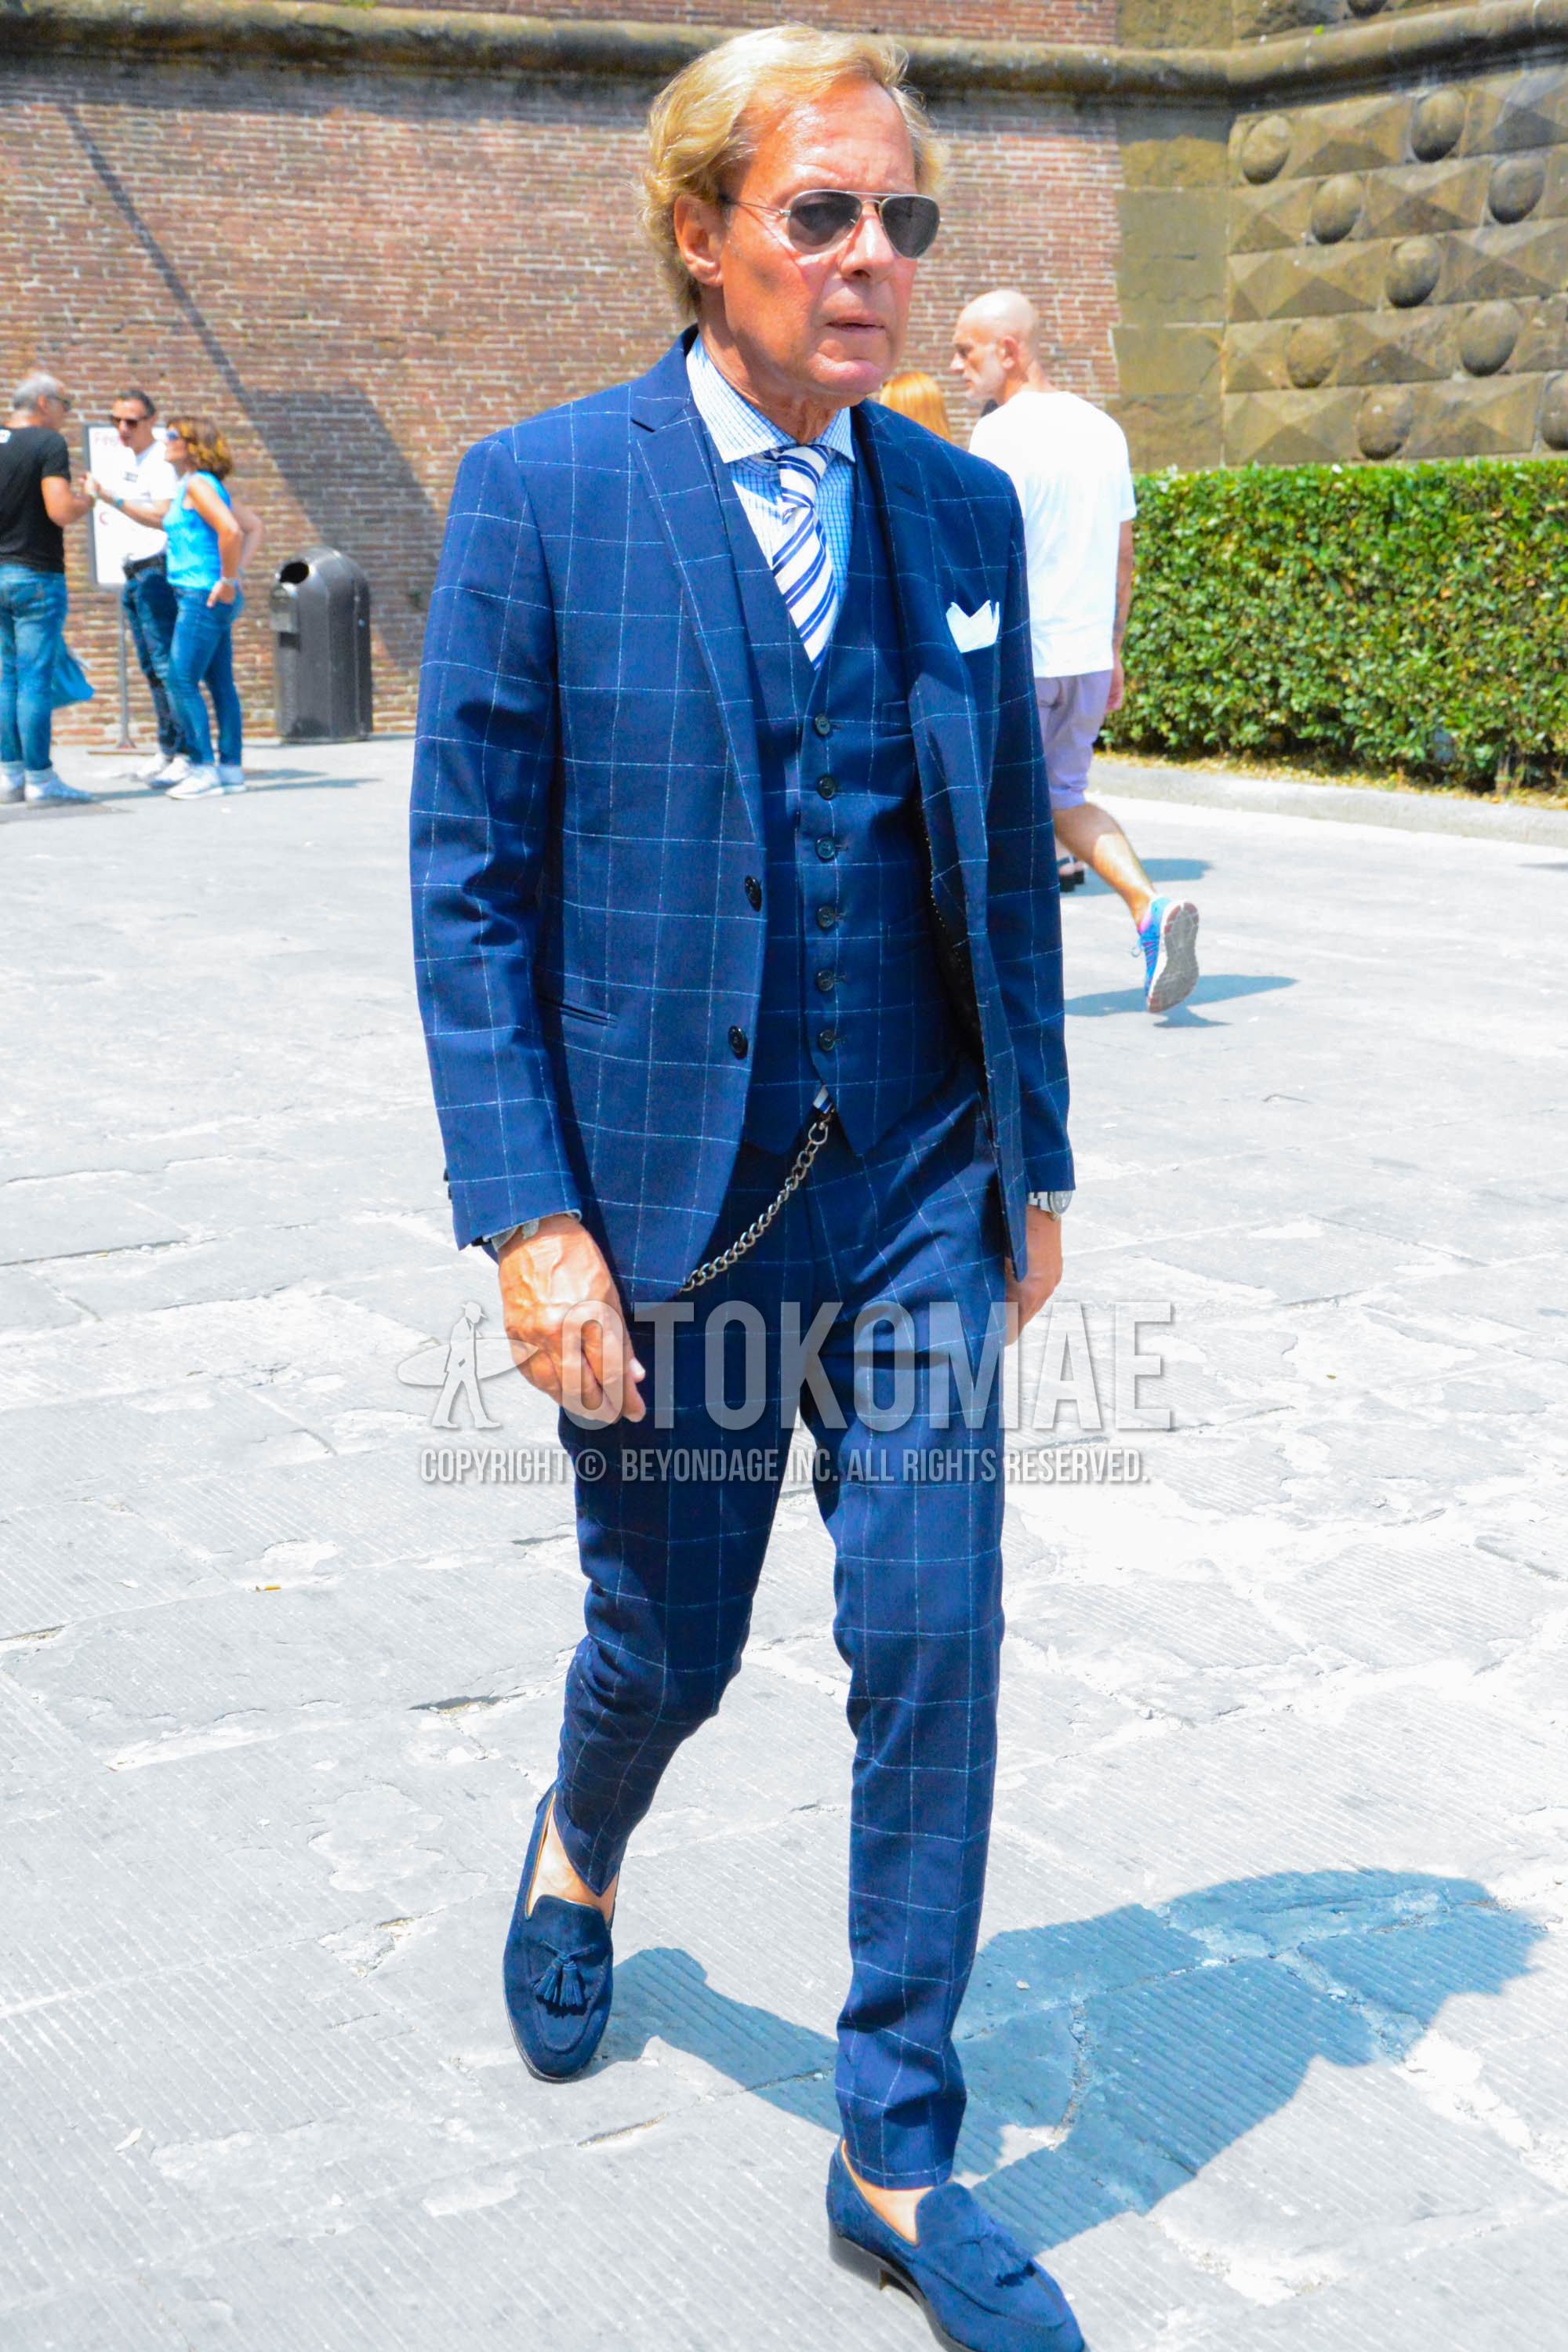 Men's spring autumn outfit with silver plain sunglasses, light blue check shirt, blue tassel loafers leather shoes, navy check three-piece suit, blue white regimental necktie.